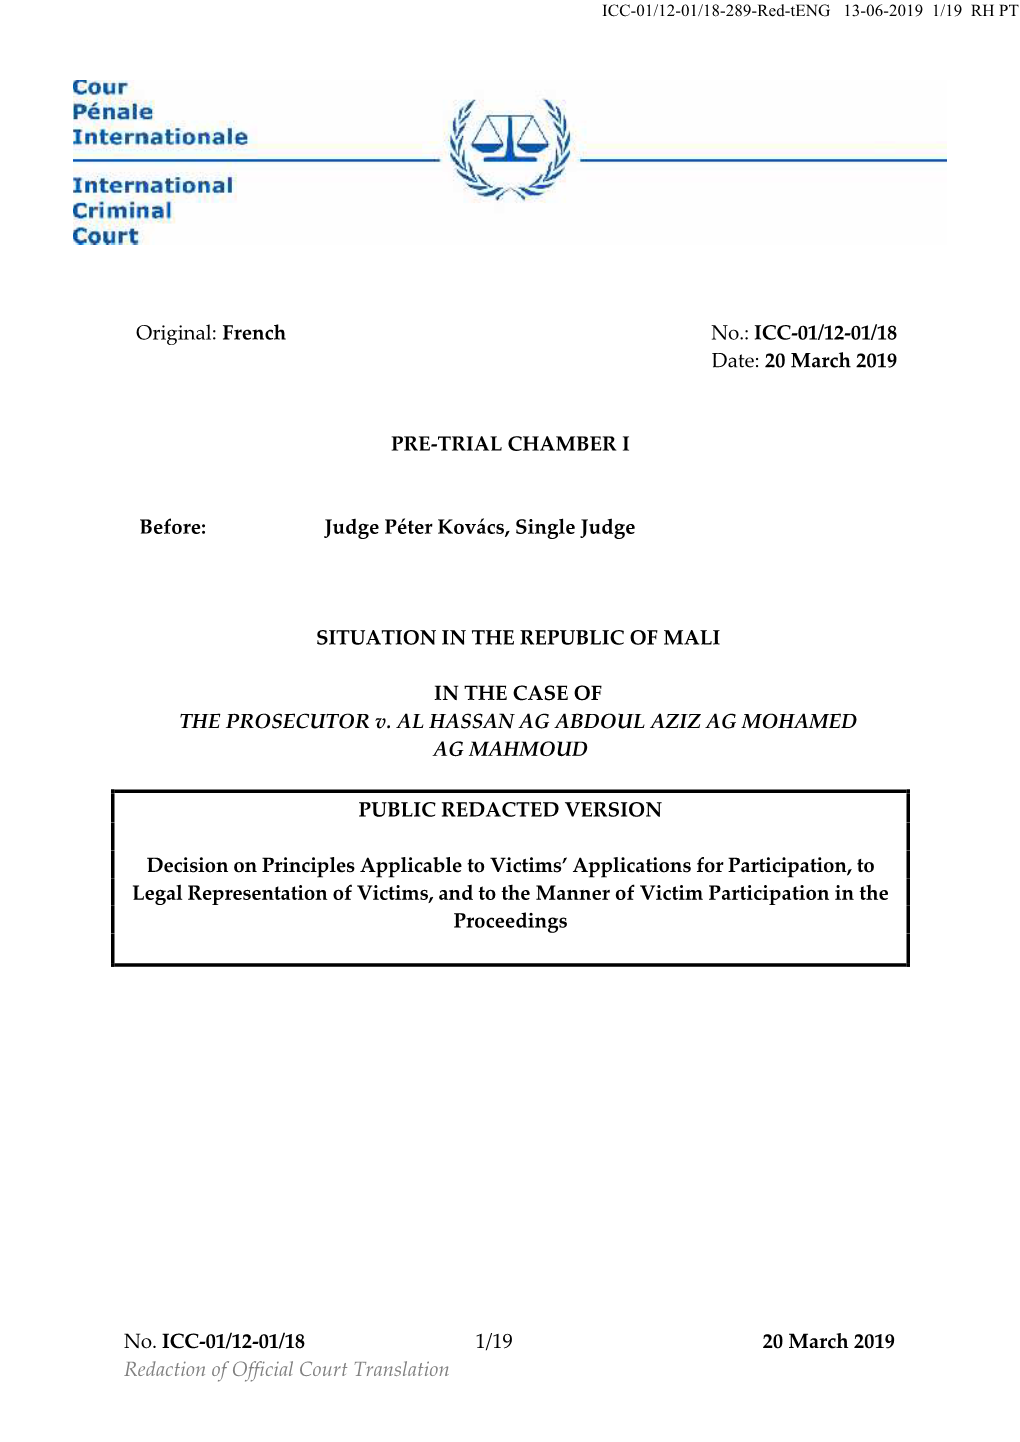 No. ICC-01/12-01/18 1/19 20 March 2019 Redaction of Official Court Translation ICC-01/12-01/18-289-Red-Teng 13-06-2019 2/19 RH PT